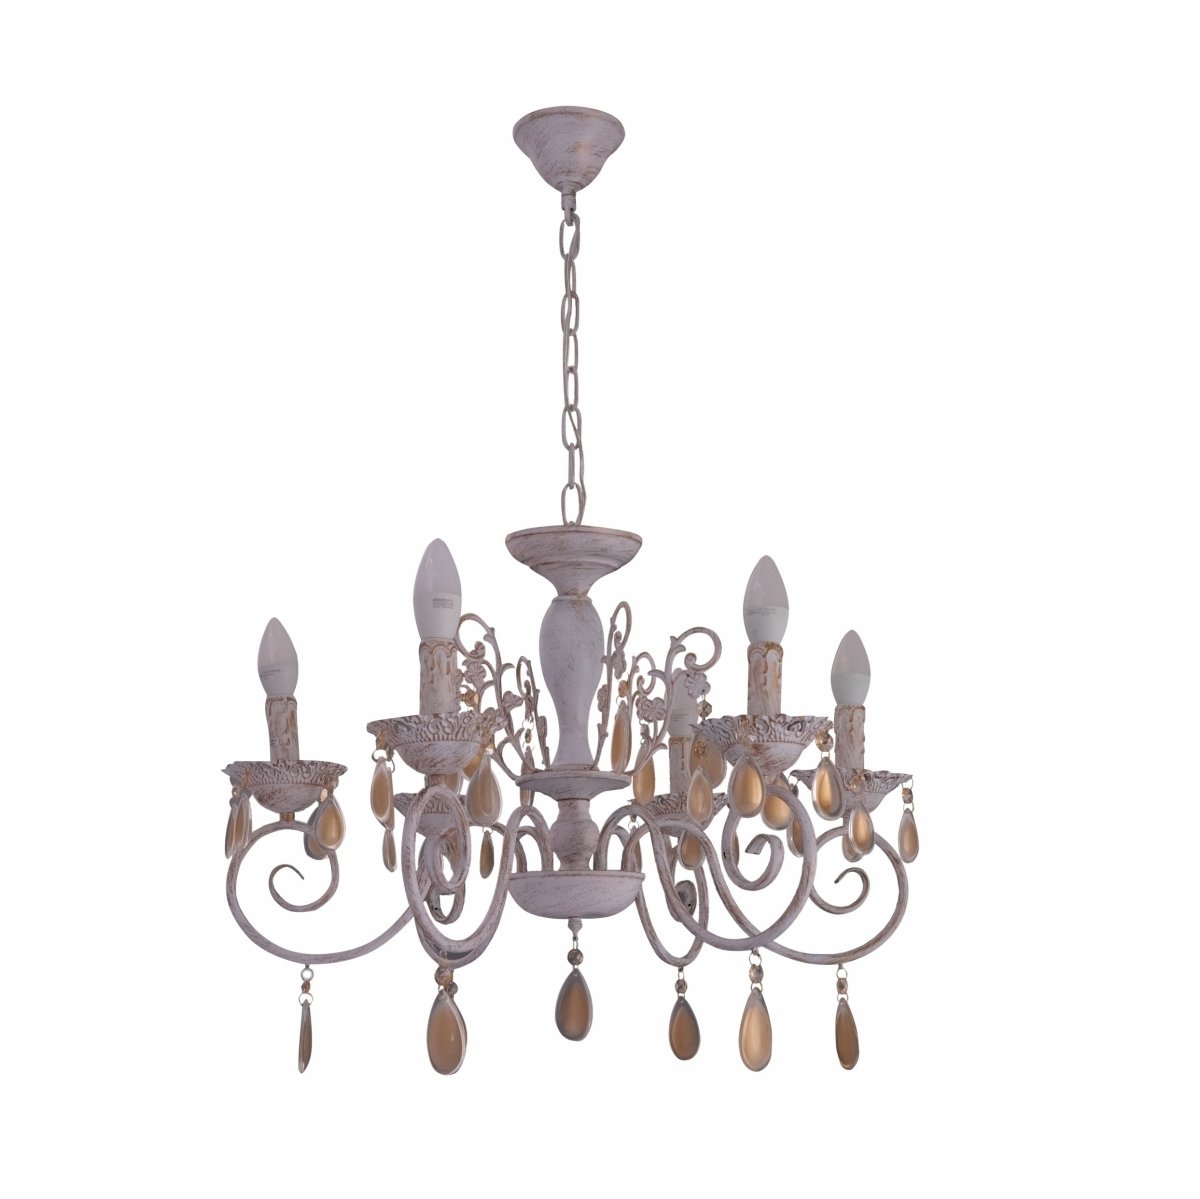 Main image of Amber Crystals Rice White with Gold Brushed Metal 6 Arm Chandelier with E14 Fitting | TEKLED 158-17850